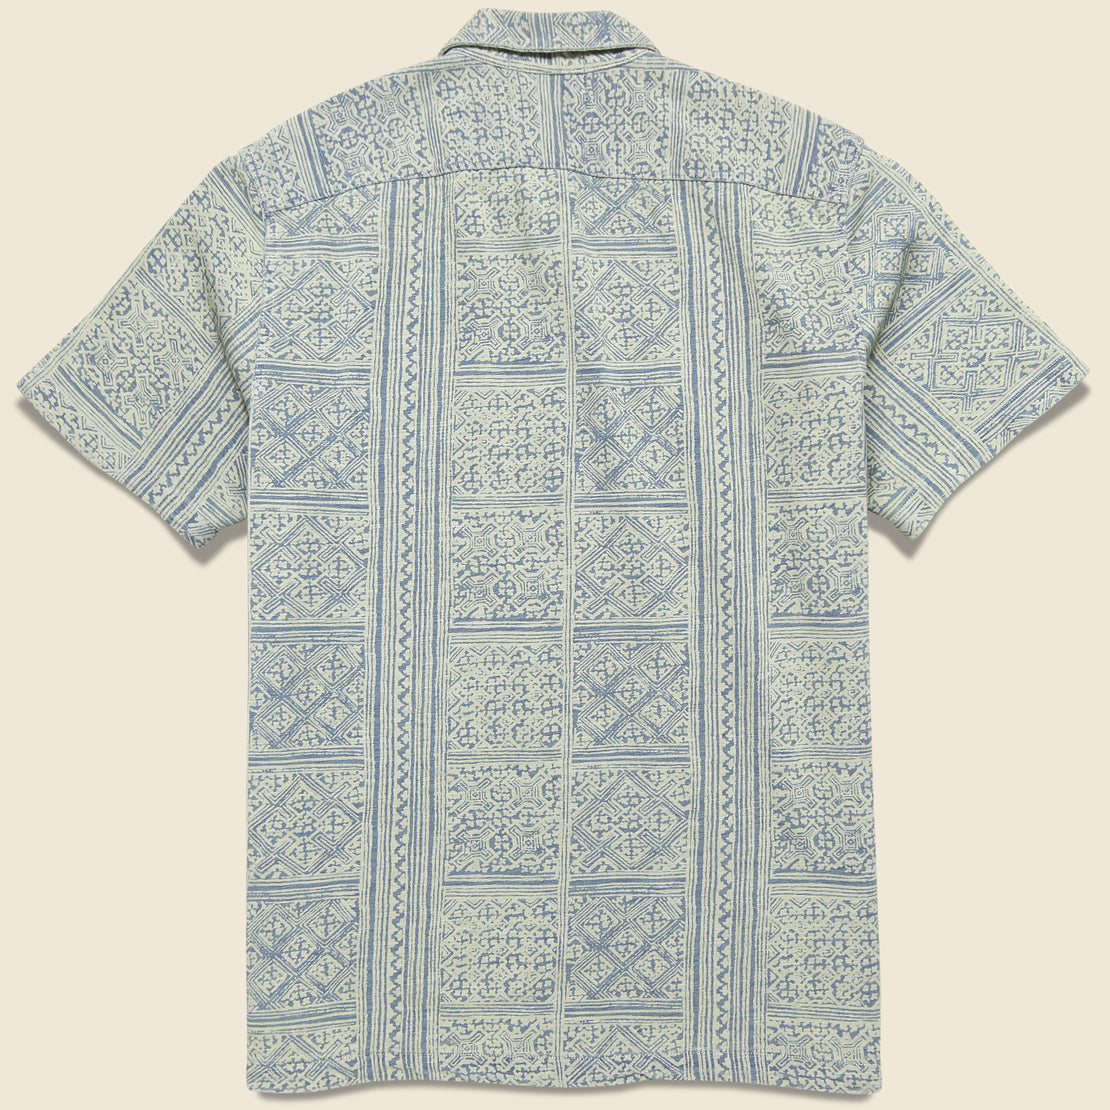 Bandana Print Jersey Camp Shirt - Indigo/Cream - RRL - STAG Provisions - Tops - S/S Woven - Other Pattern